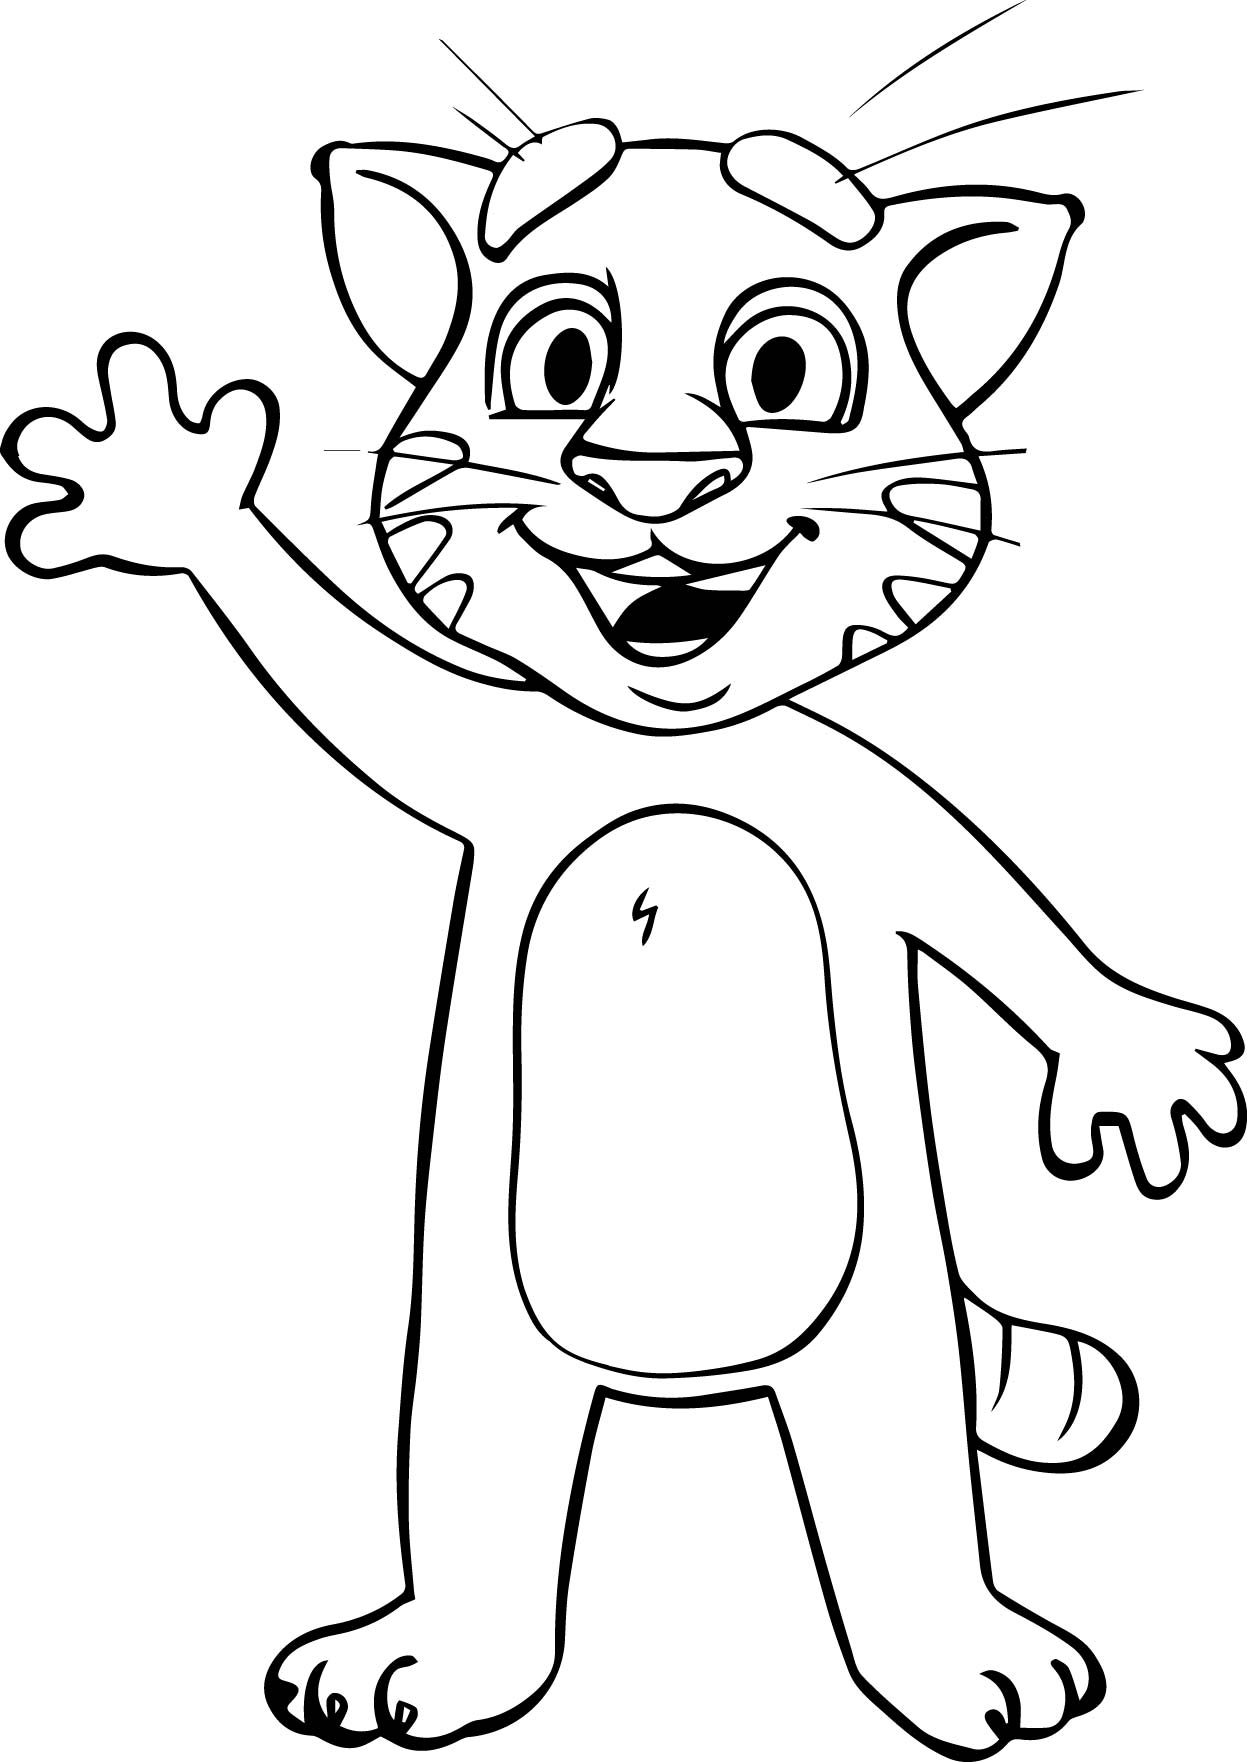 Cartoon Cat Coloring Pages at GetColorings.com | Free printable